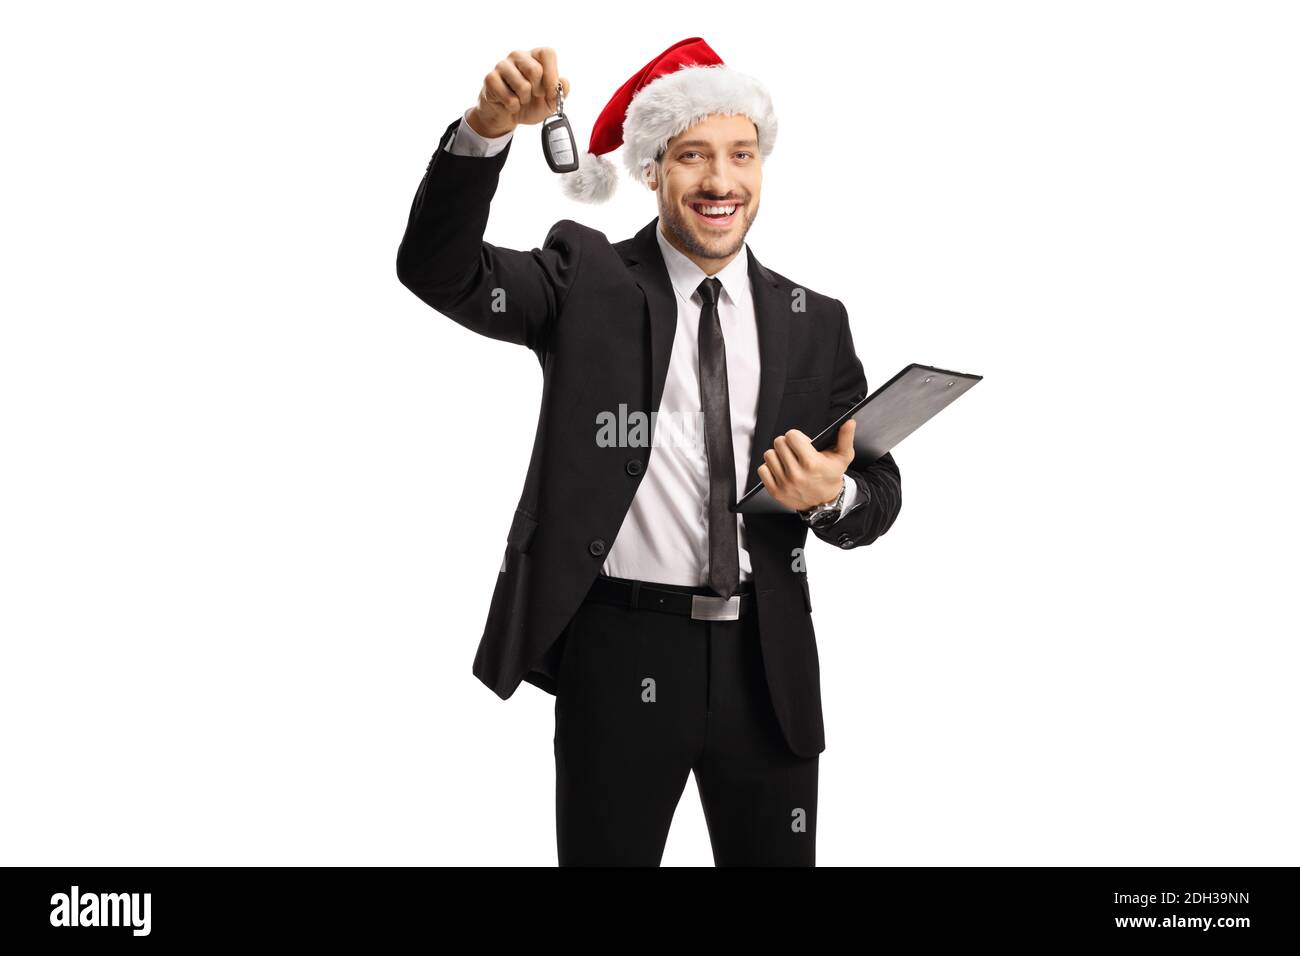 Smiling man in a suit showing a car key and wearing a santa claus hat isolated on white background Stock Photo